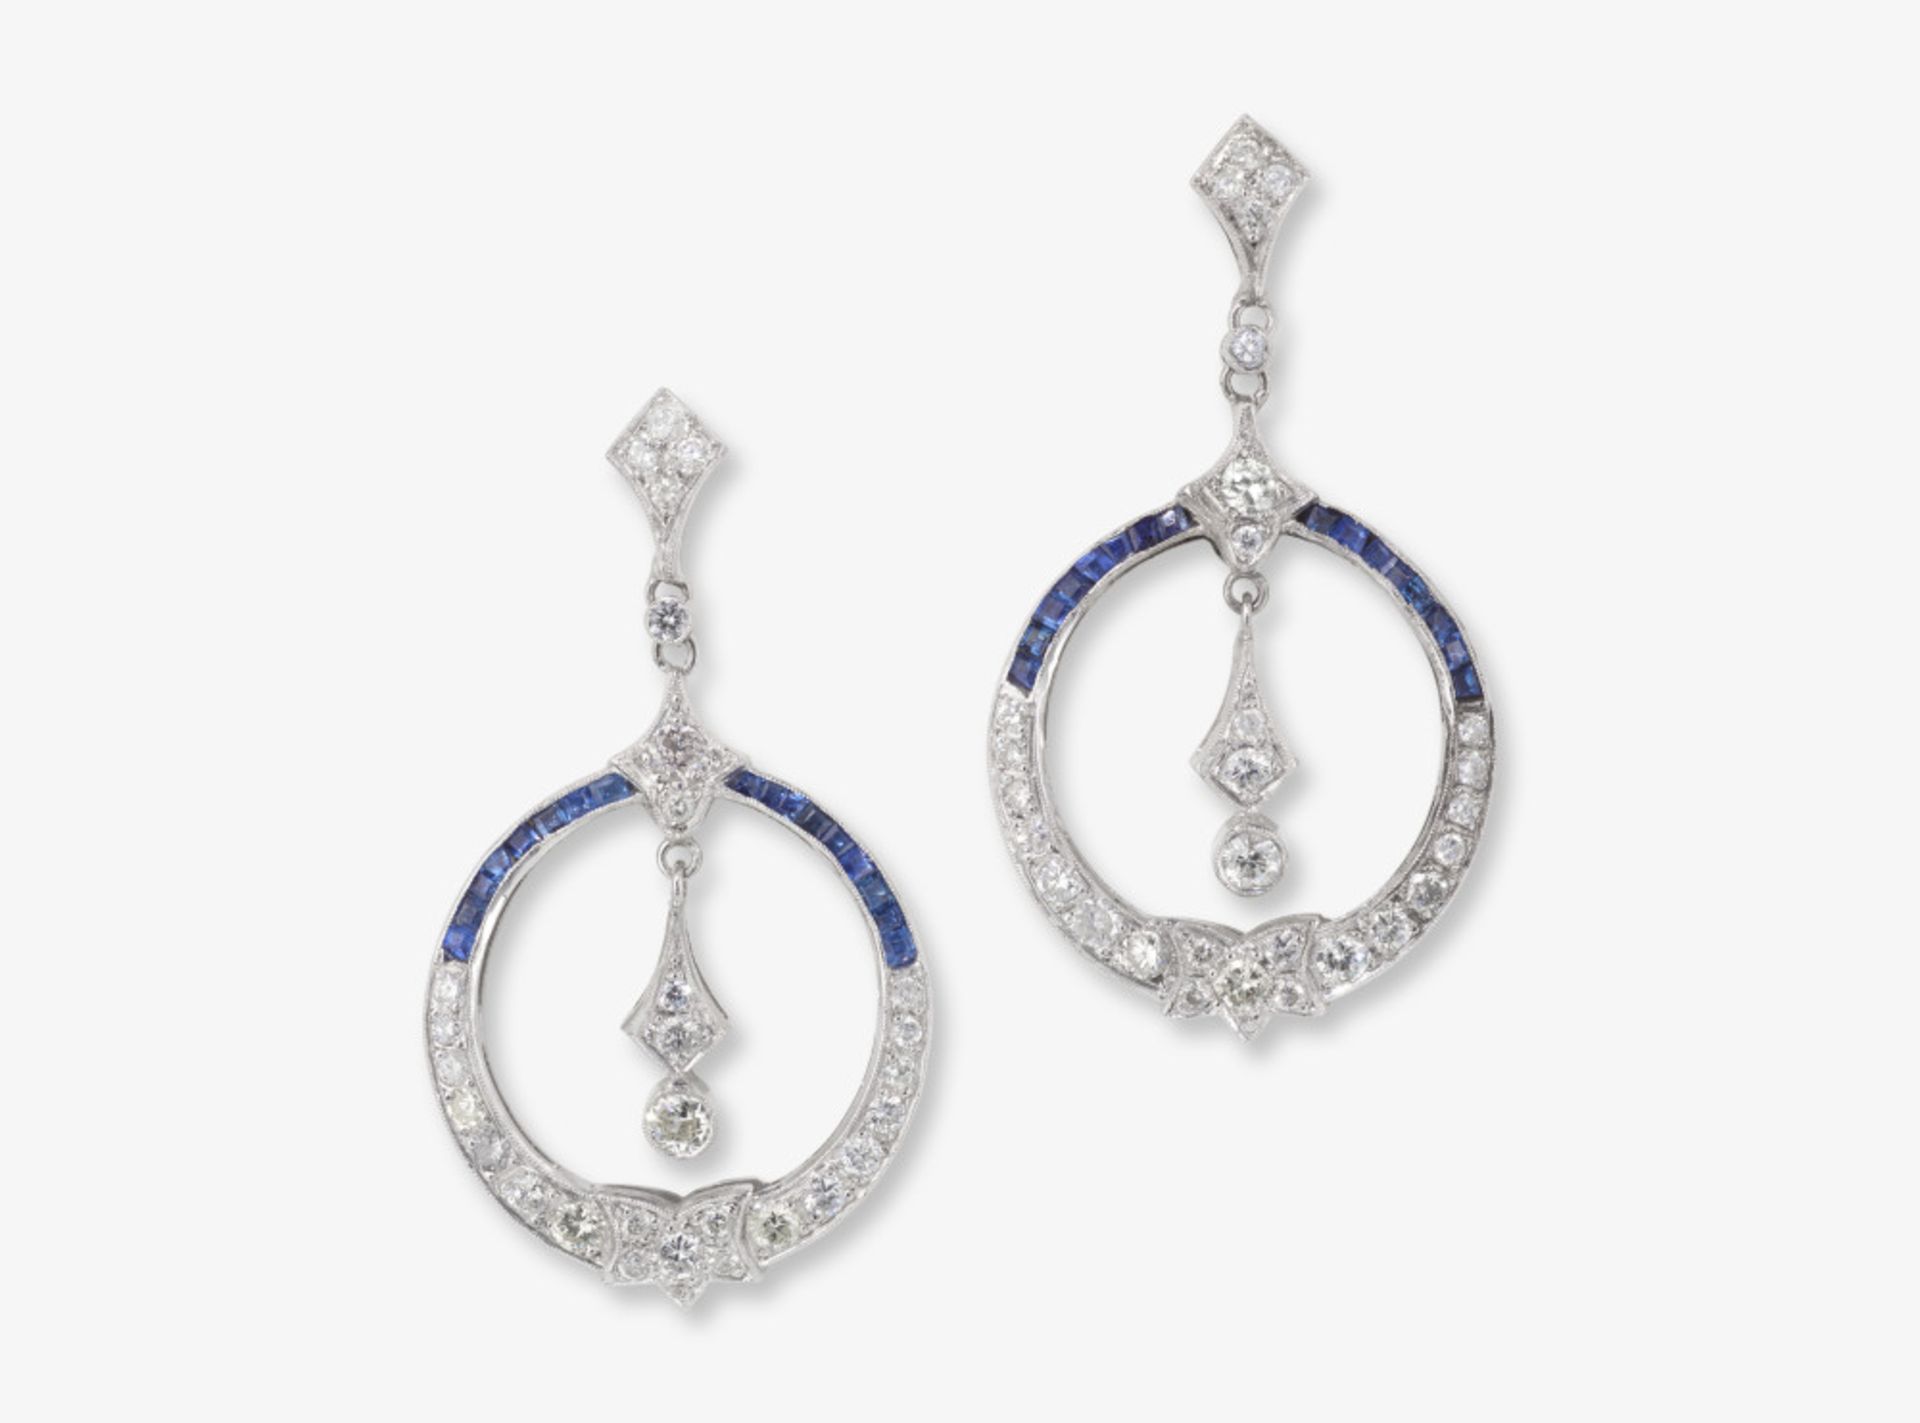 A pair of historical drop earrings decorated with brilliant-cut diamonds and sapphires - America, 19